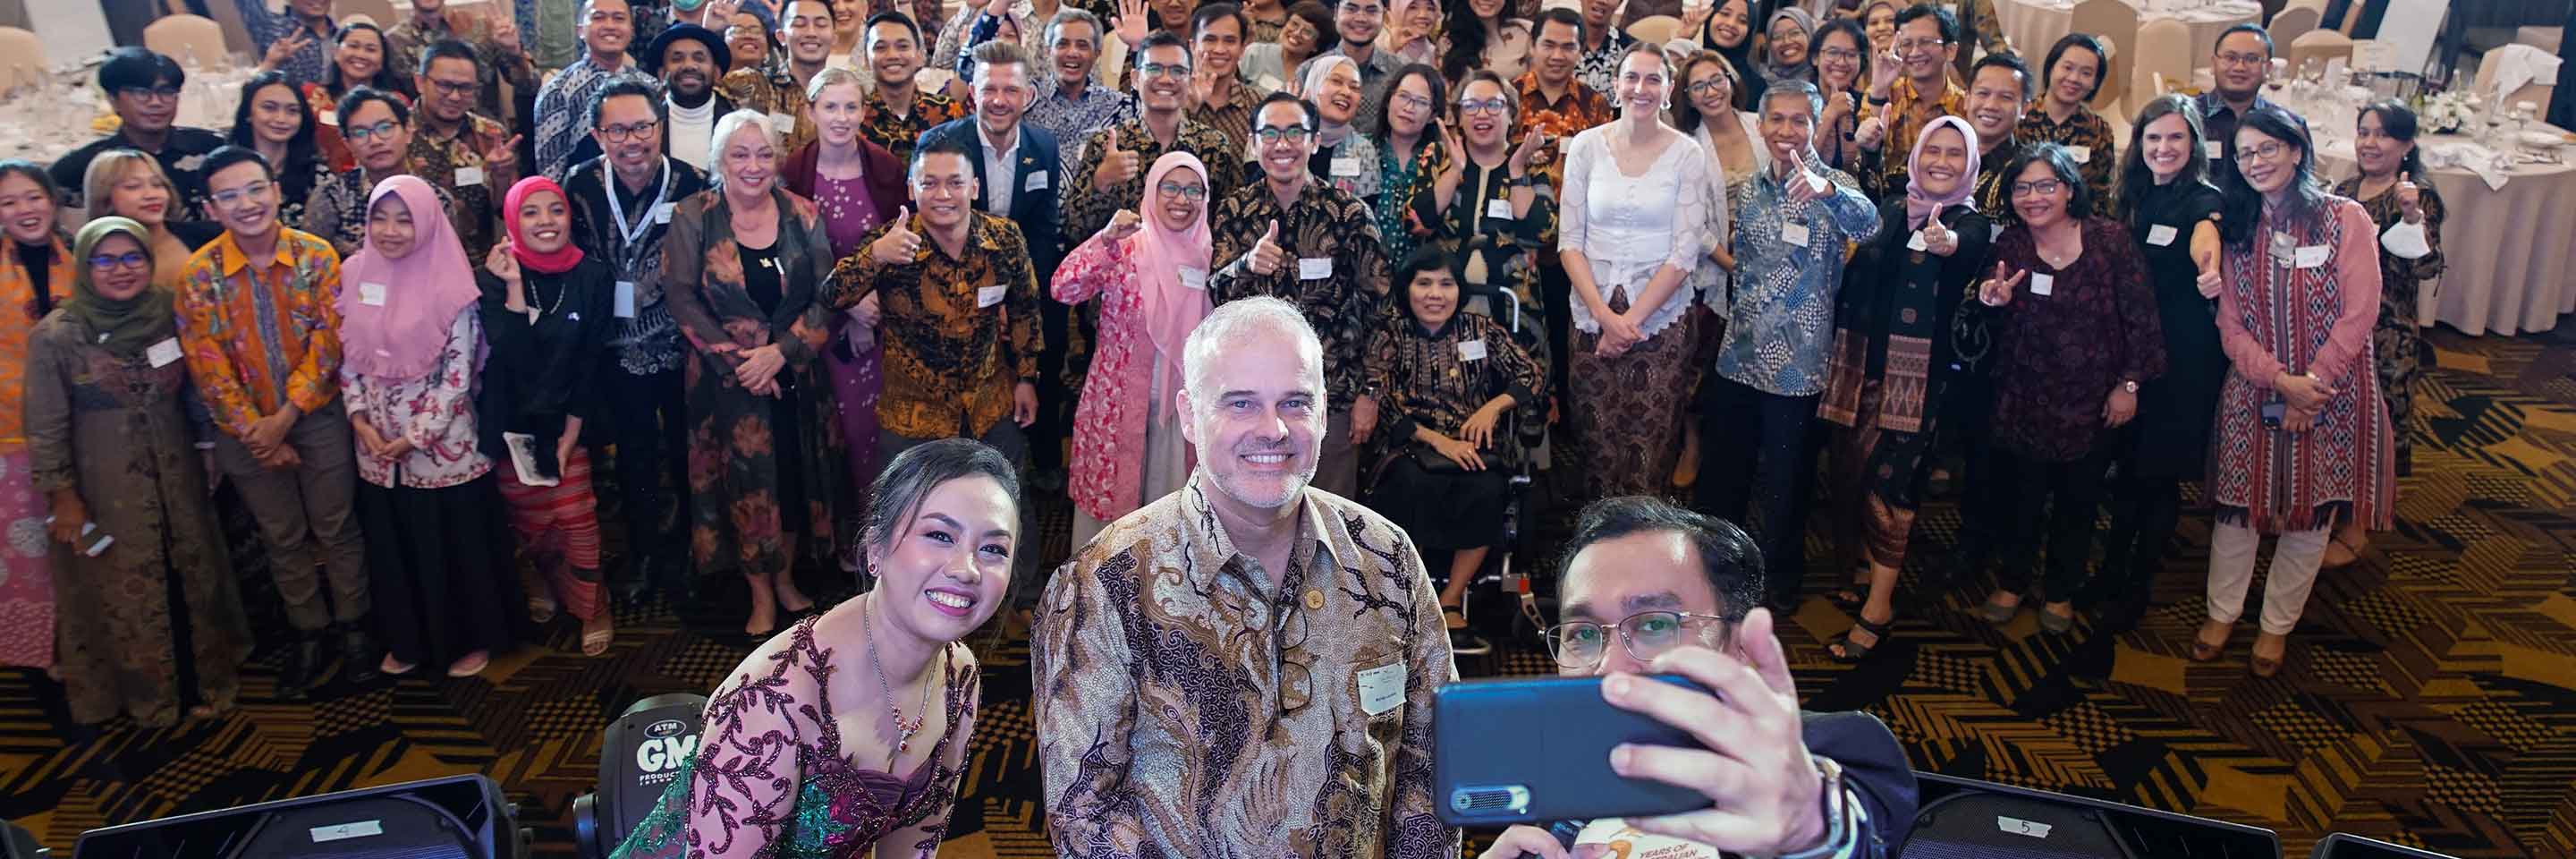 Continuing its year-long program to mark 70 years of Australian scholarships in Indonesia, the Australian Embassy takes its jubilant celebrations to Yogyakarta. Over 250 Yogyakarta-based Australian alumni, and members of the Indonesia-Australia youth orga